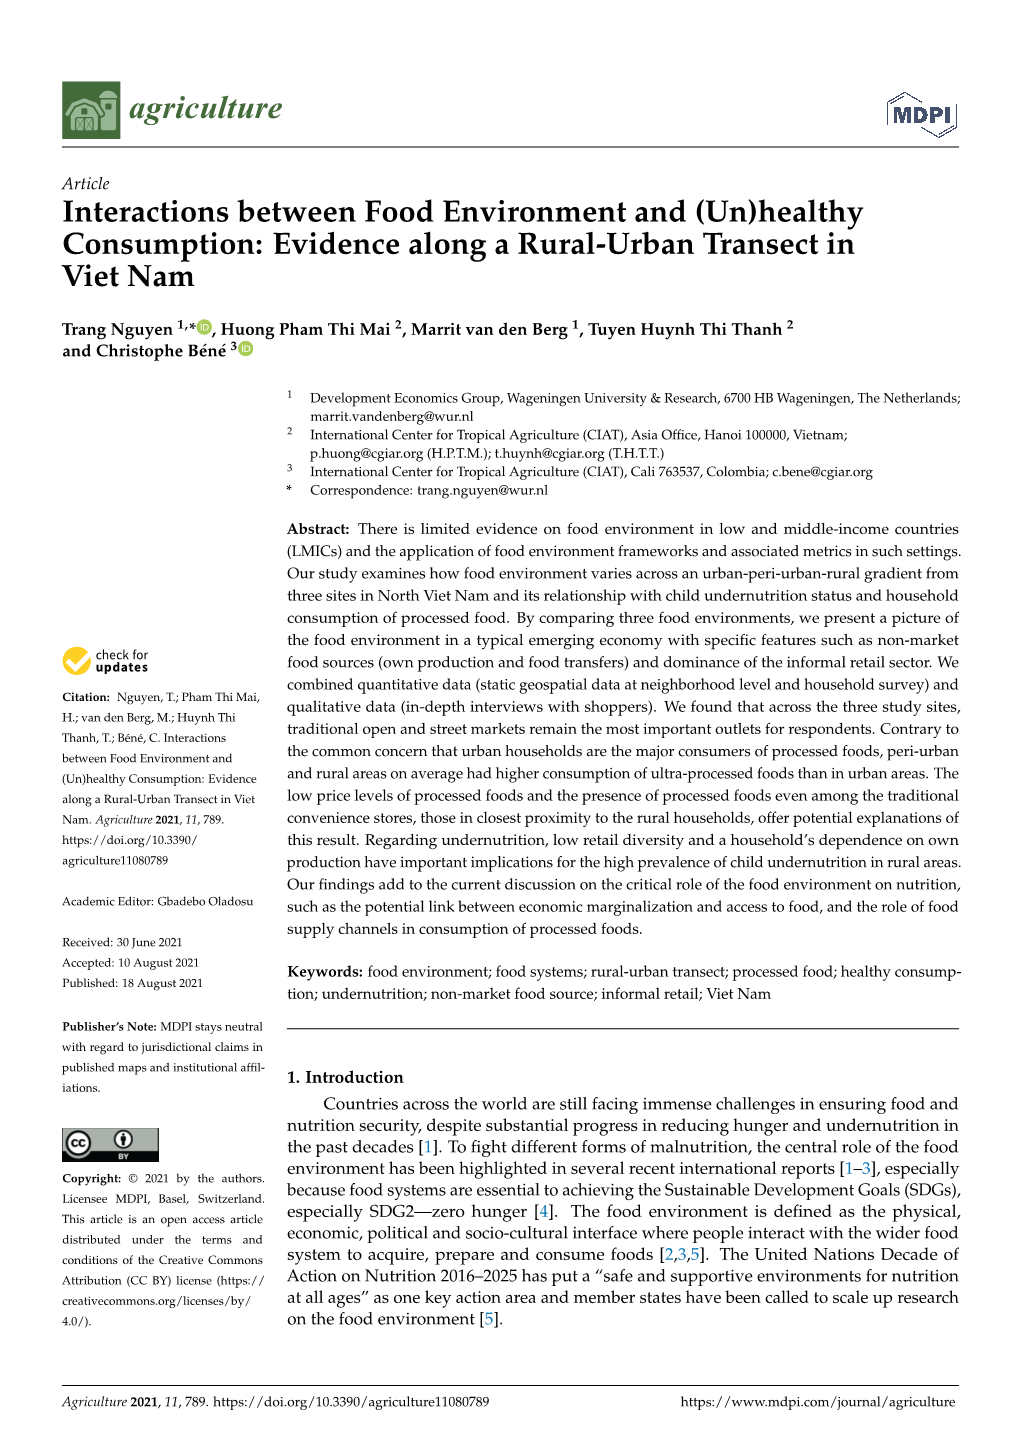 Evidence Along a Rural-Urban Transect in Viet Nam